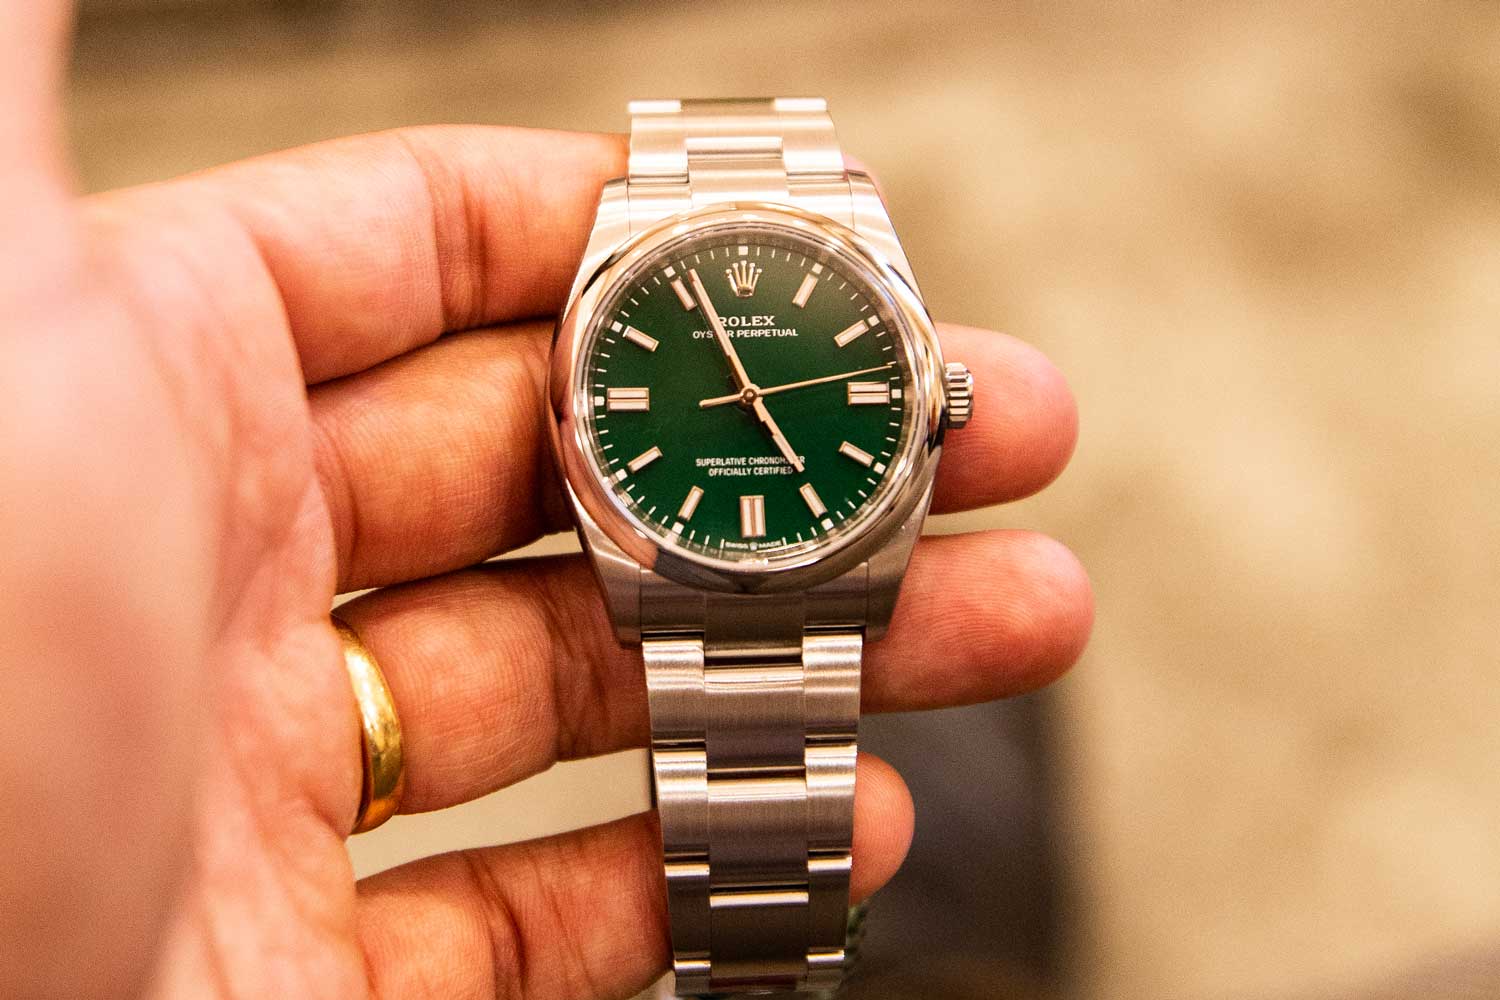 patron handling Dominerende Stella for the People: The 2020 Rolex Oyster Perpetual - Revolution Watch